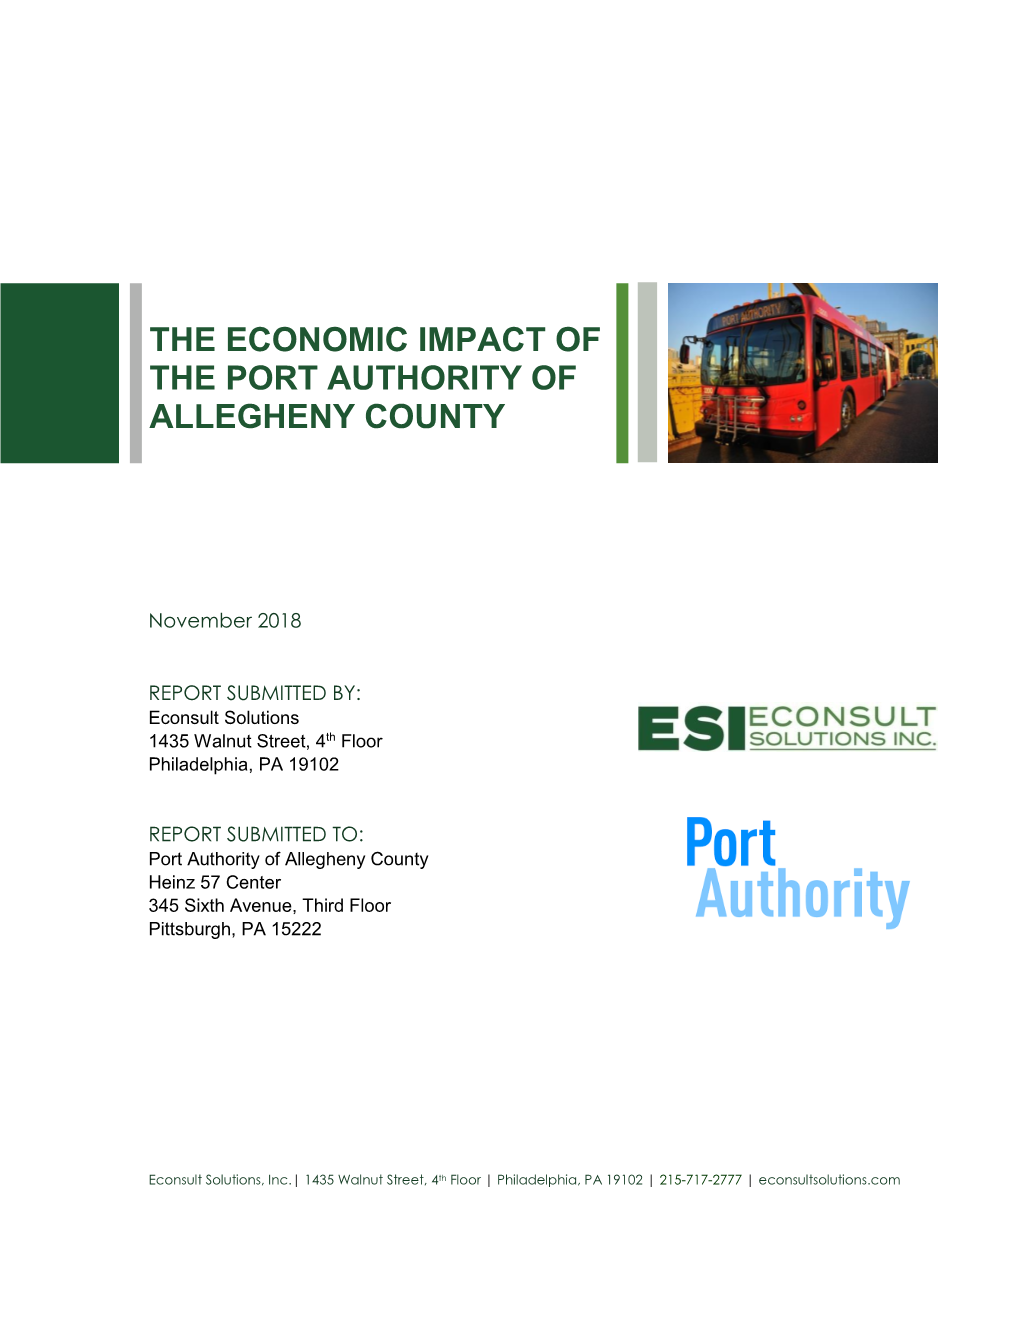 The Economic Impact of the Port Authority of Allegheny County